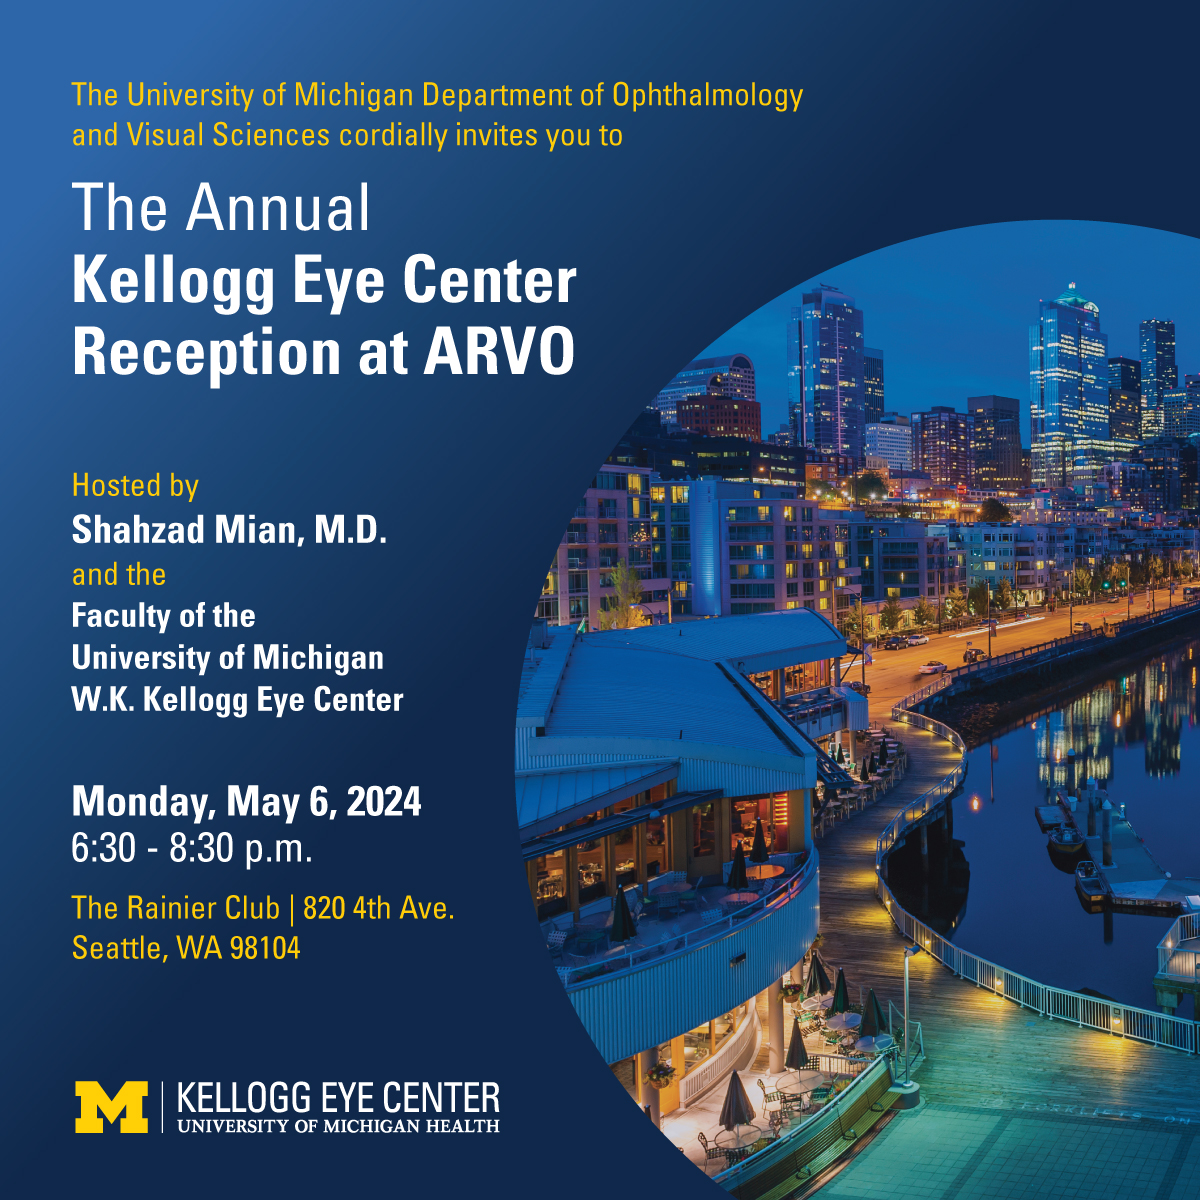 Join us for our annual reception at ARVO on May 6! RSVP by April 24: docs.google.com/forms/d/1N6DpH…